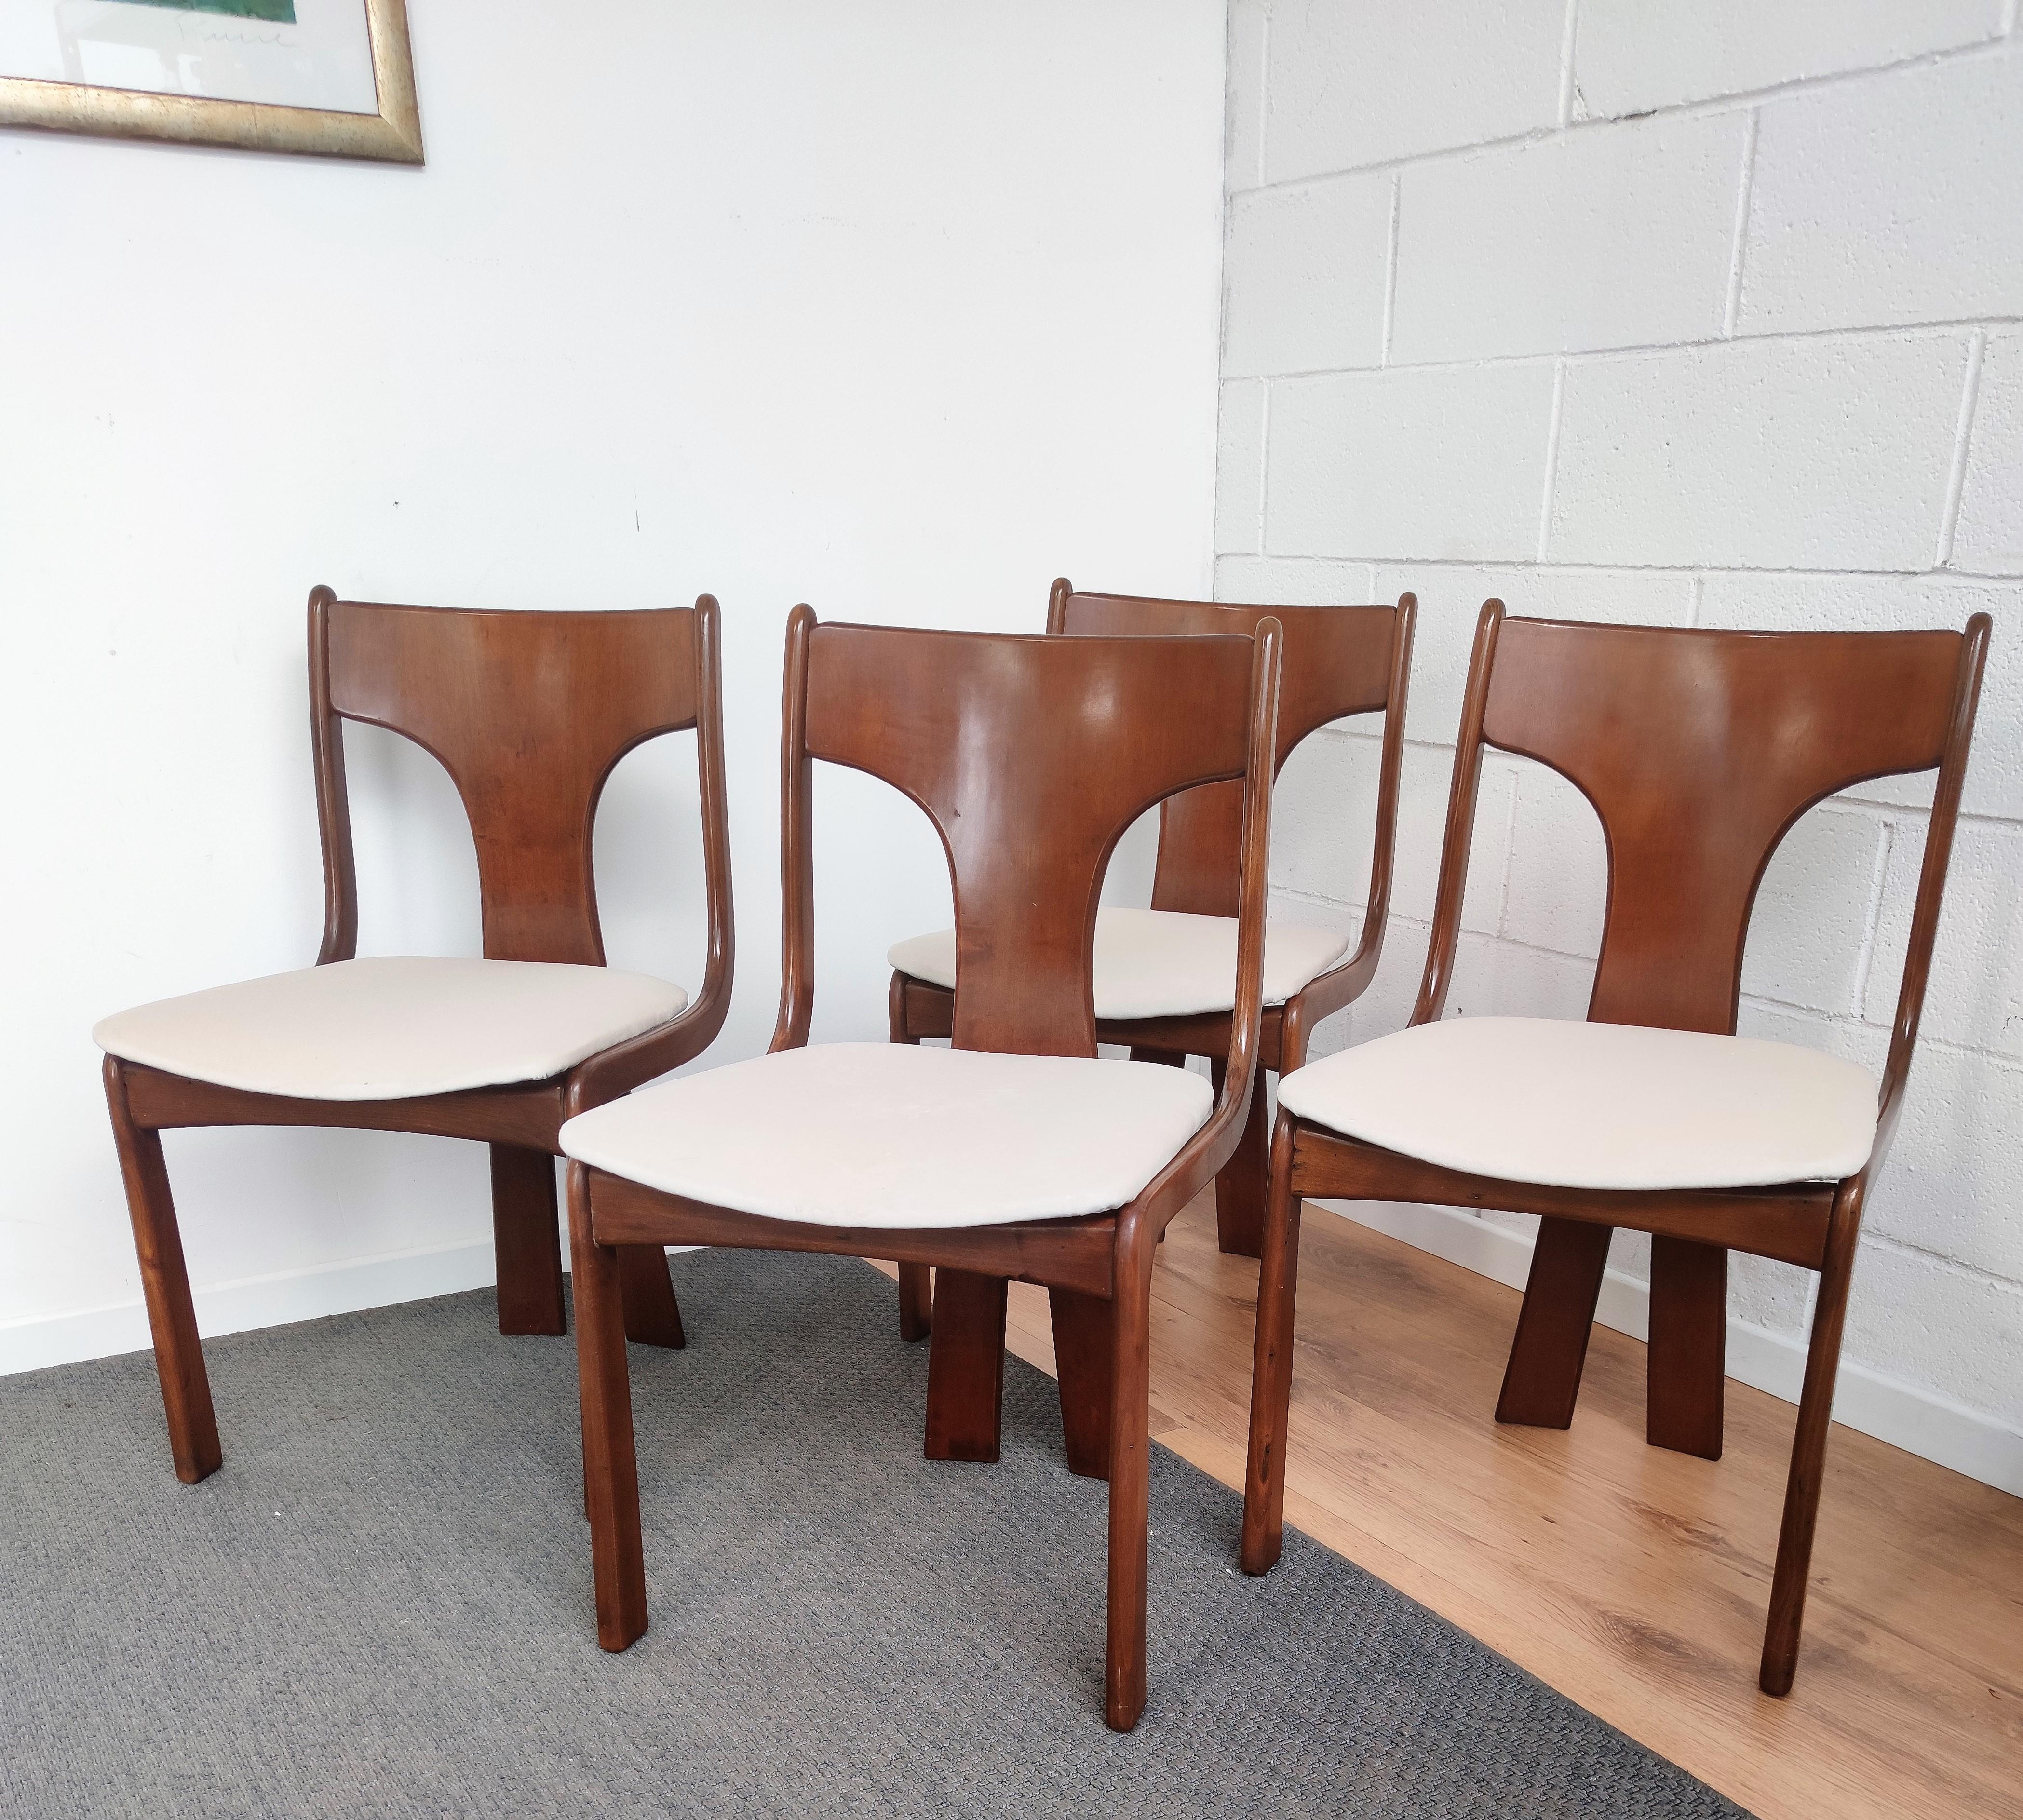 Four 1950s Italian Mid-Century Modern Newly Upholstered Dining Room Chairs 3